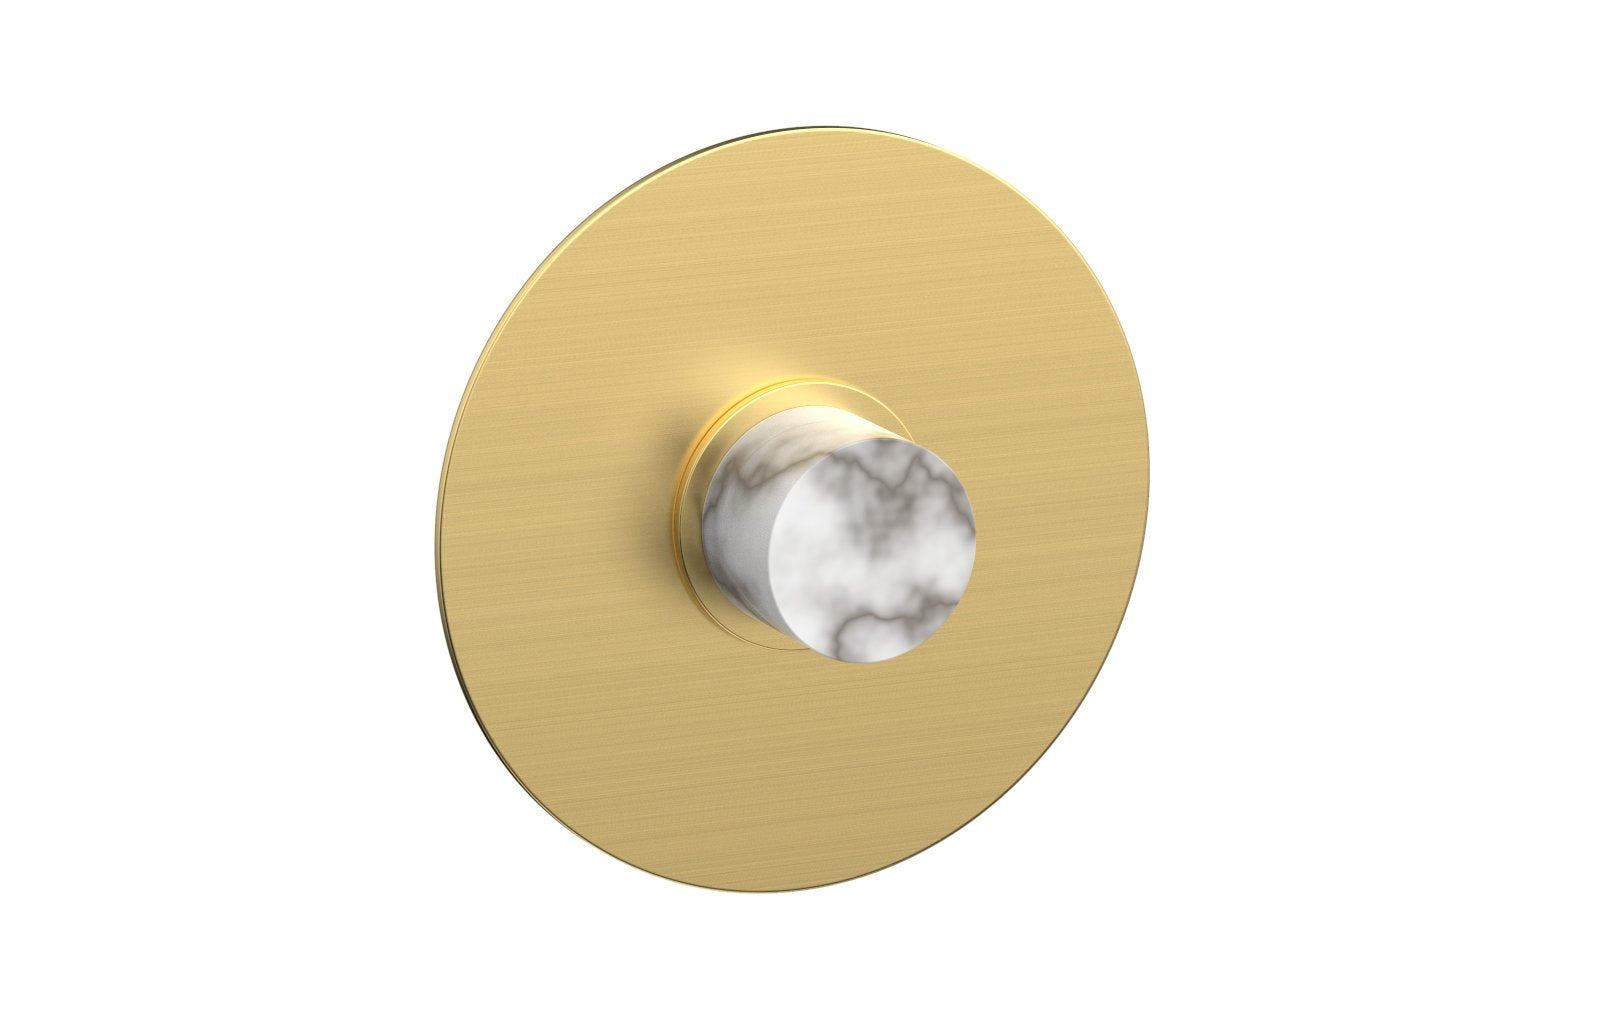 Phylrich BASIC II Pressure Balance Round Shower Plate & Handle Trim, White Marble Handle